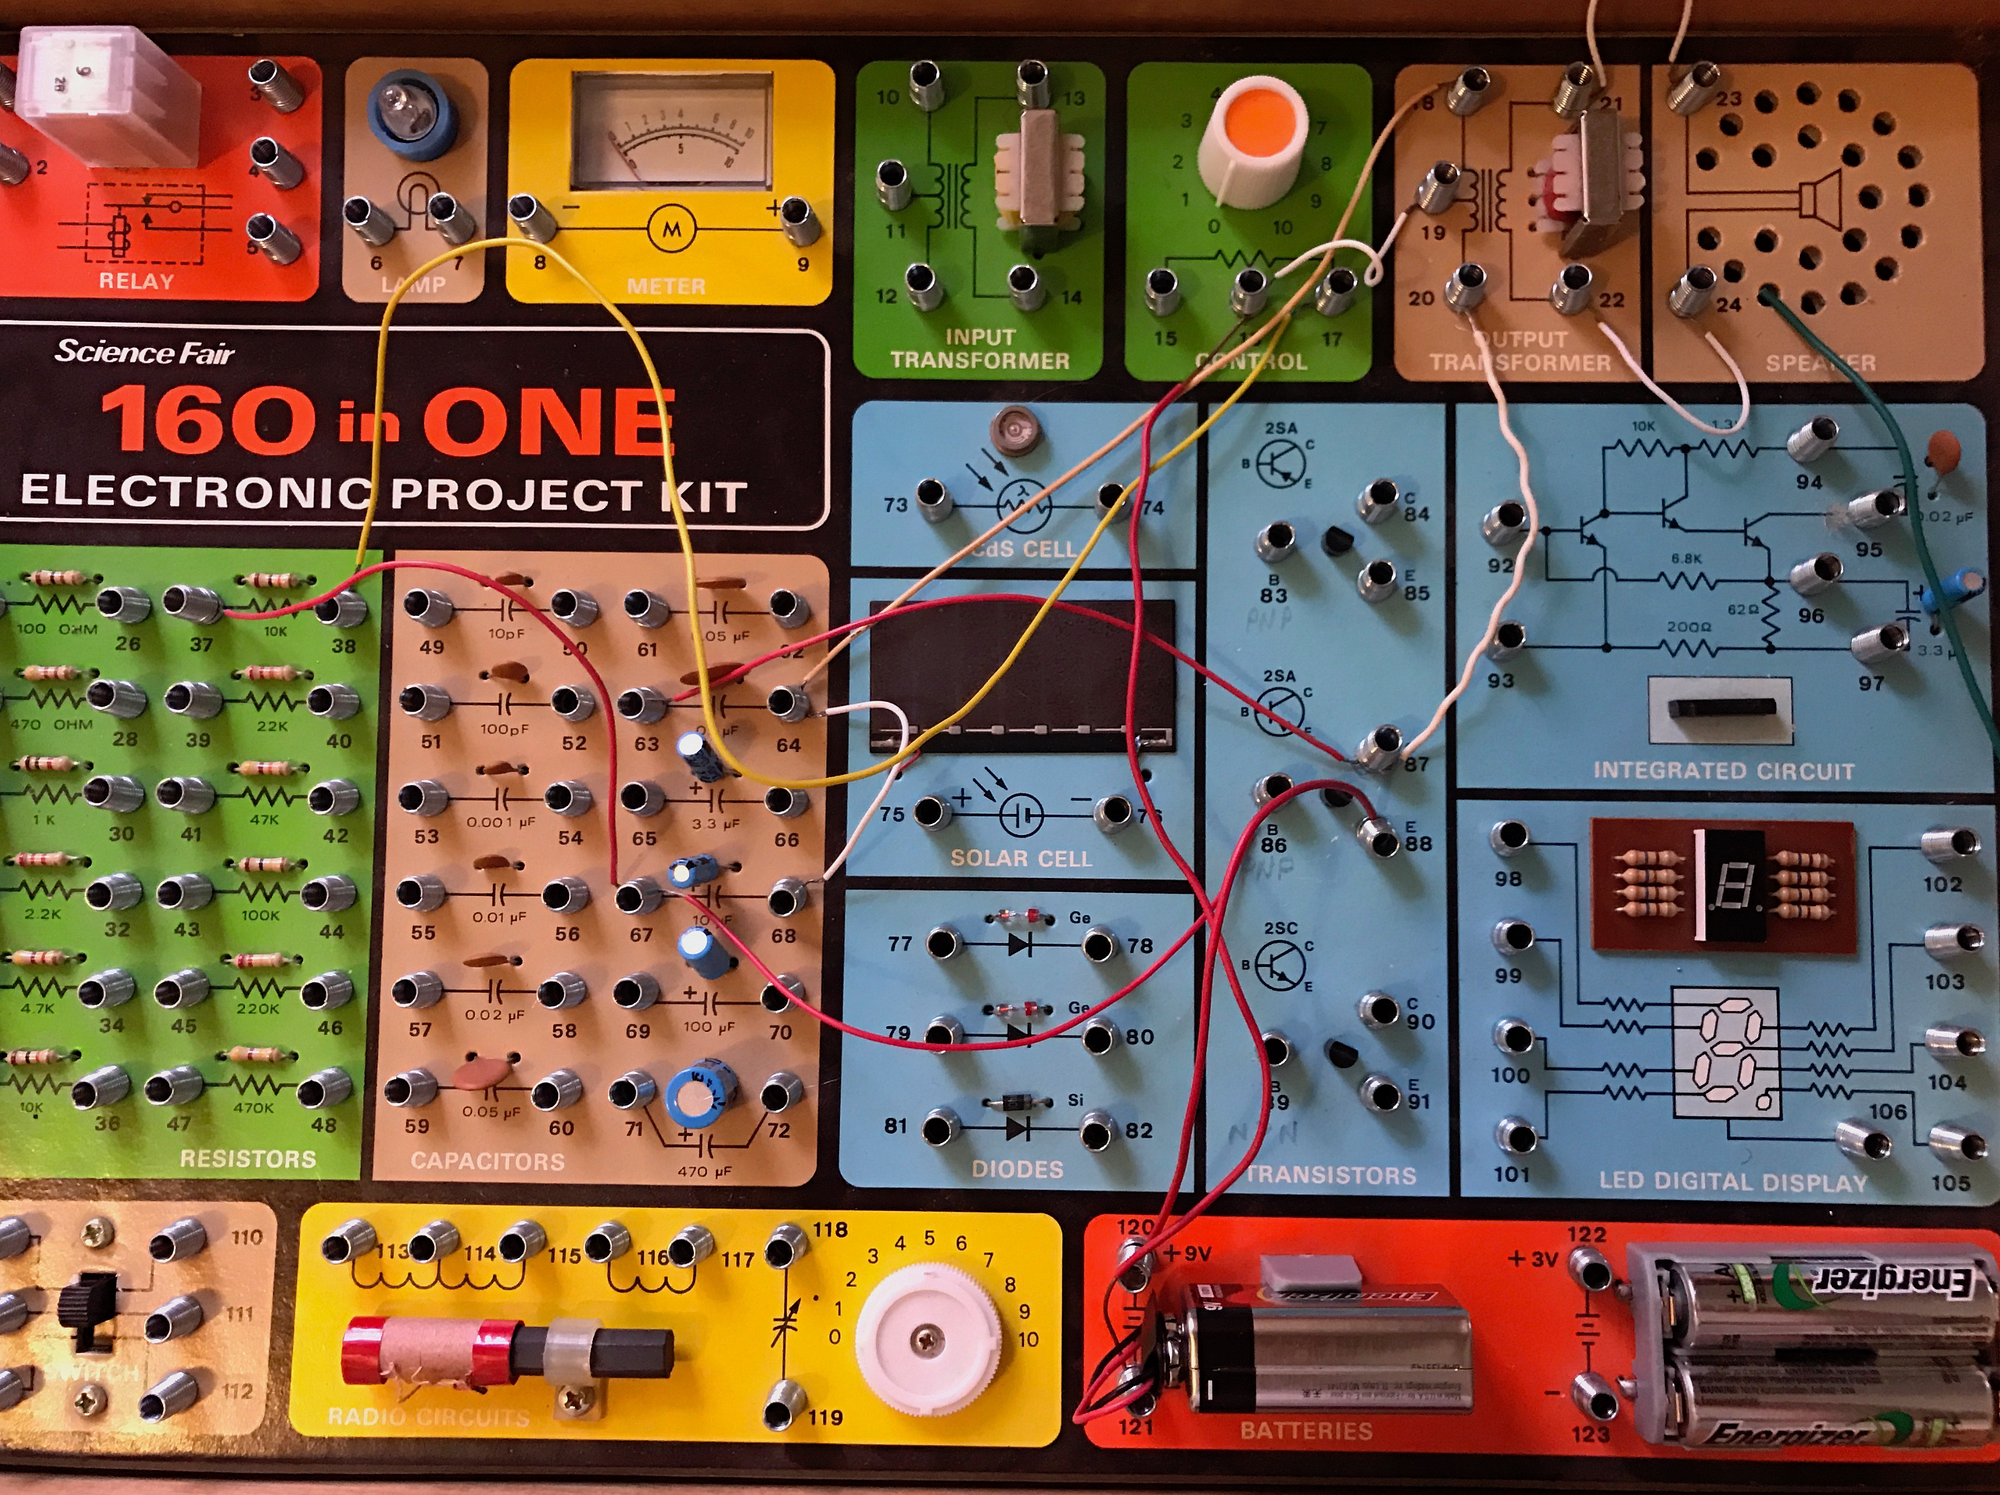 Electronic project kits: hands on with a vintage 160-in-1, by R. X. Seger